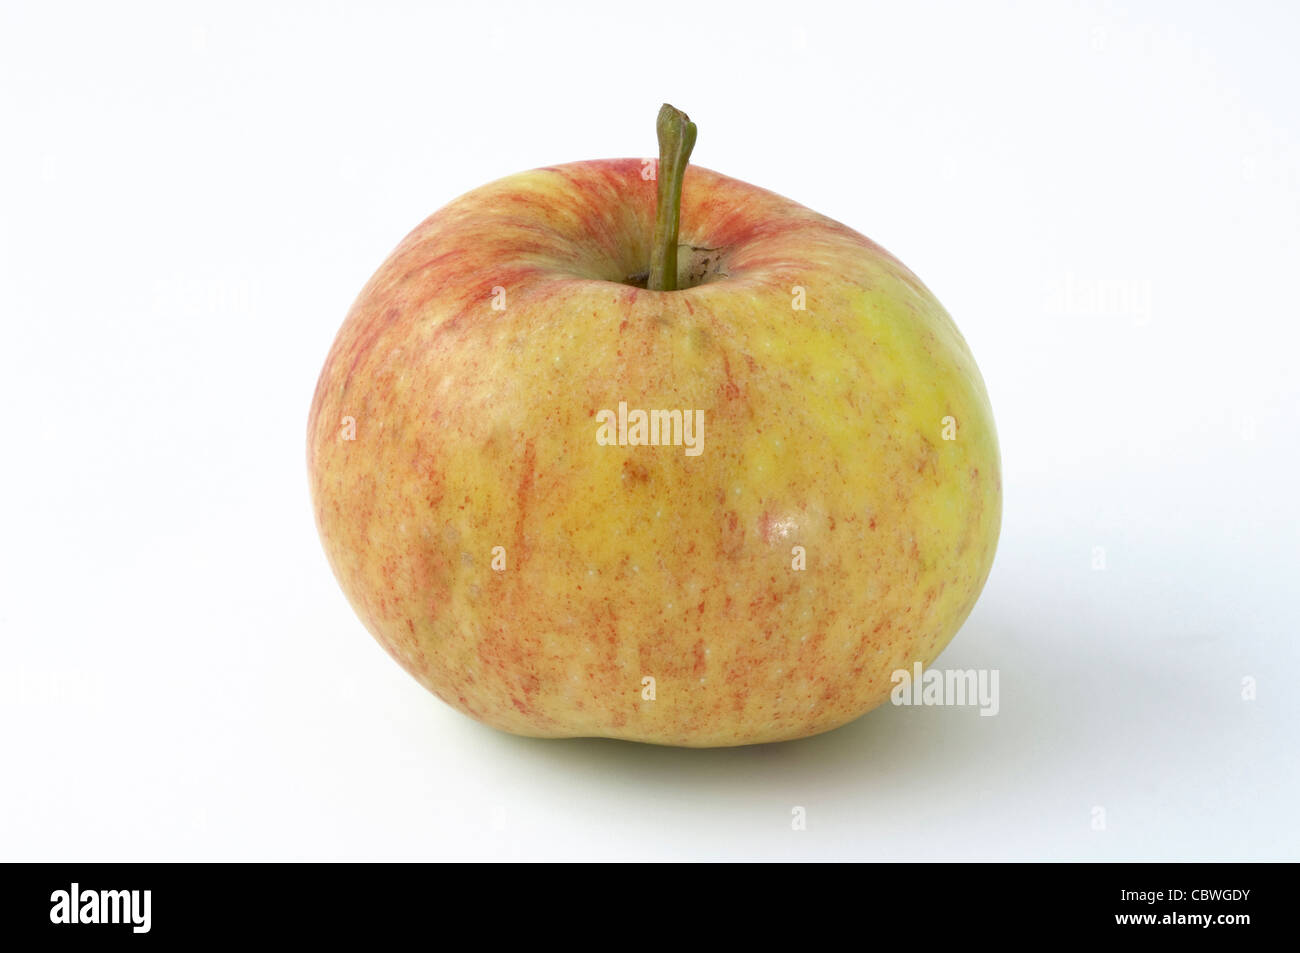 Domestic Apple (Malus domestica), variety: James Grieve, ripe fruit. Studio picture against a white background. Stock Photo